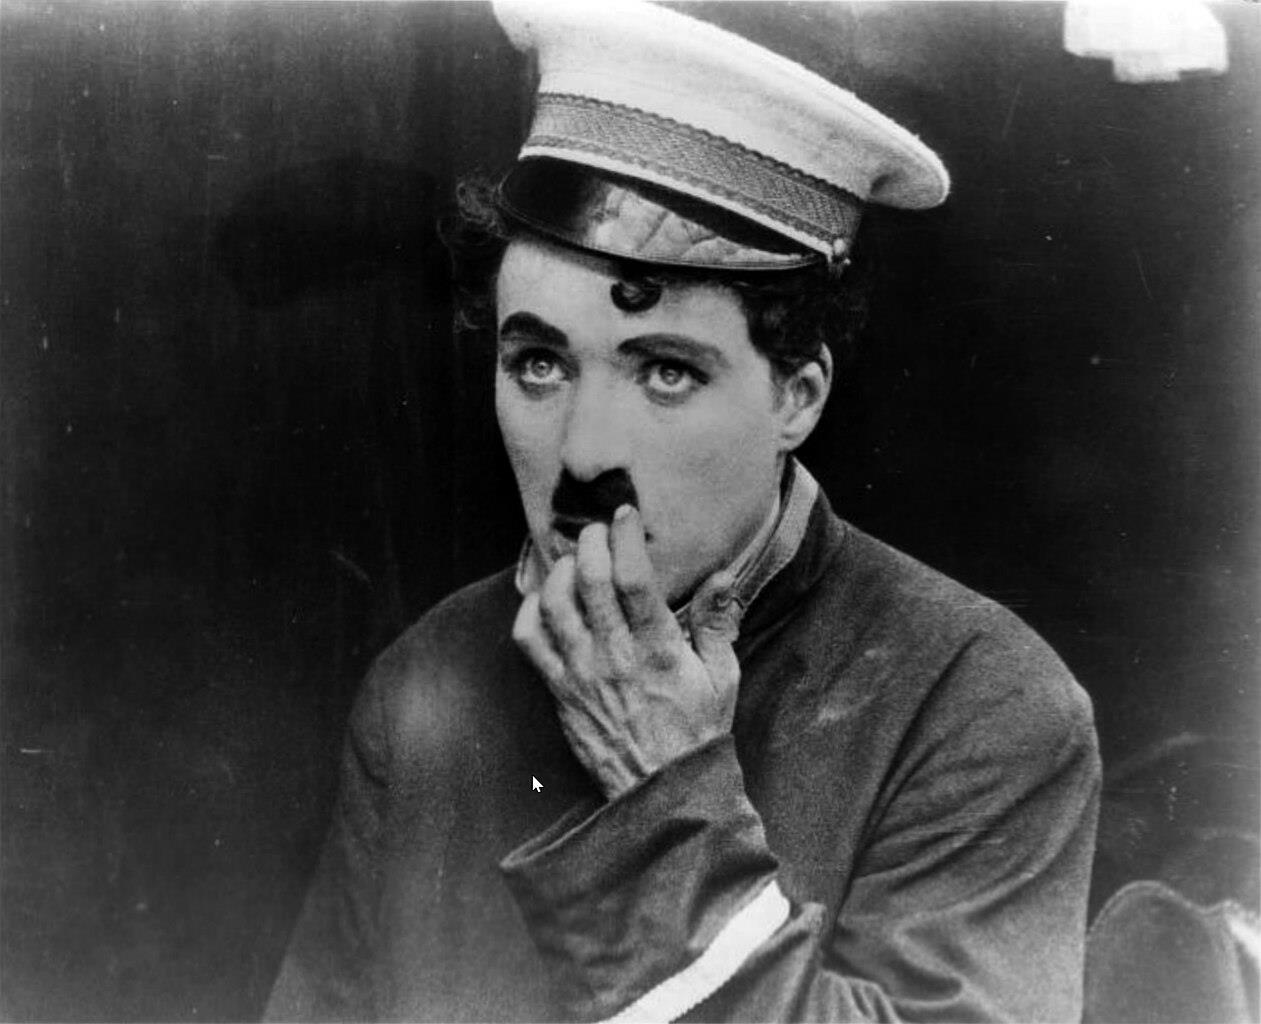 <p>While not typically seen as one of the best classic war films, this Charlie Chaplin propaganda movie still manages to captivate audiences with its entertaining storyline. </p>  <p>It offers a glimpse into the German Zeppelin attacks during World War I, showcasing Chaplin's unique take on historical events.</p>